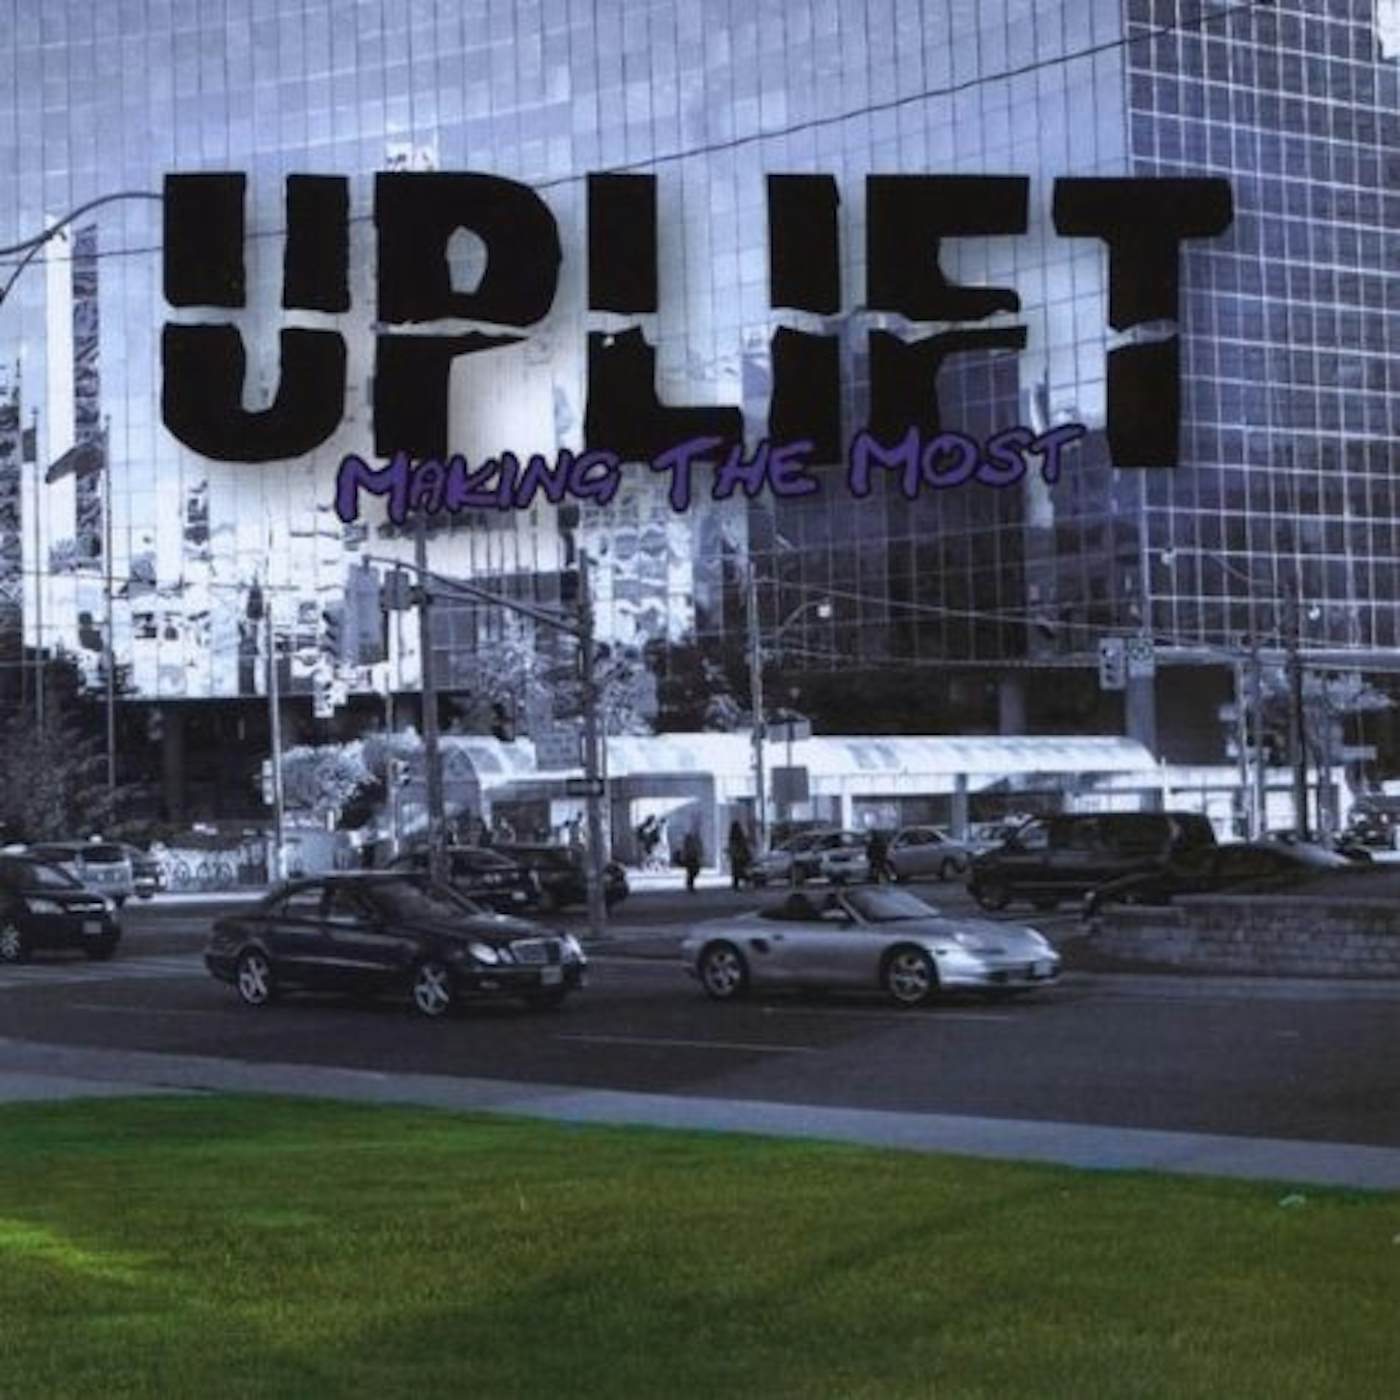 Uplift MAKING THE MOST CD